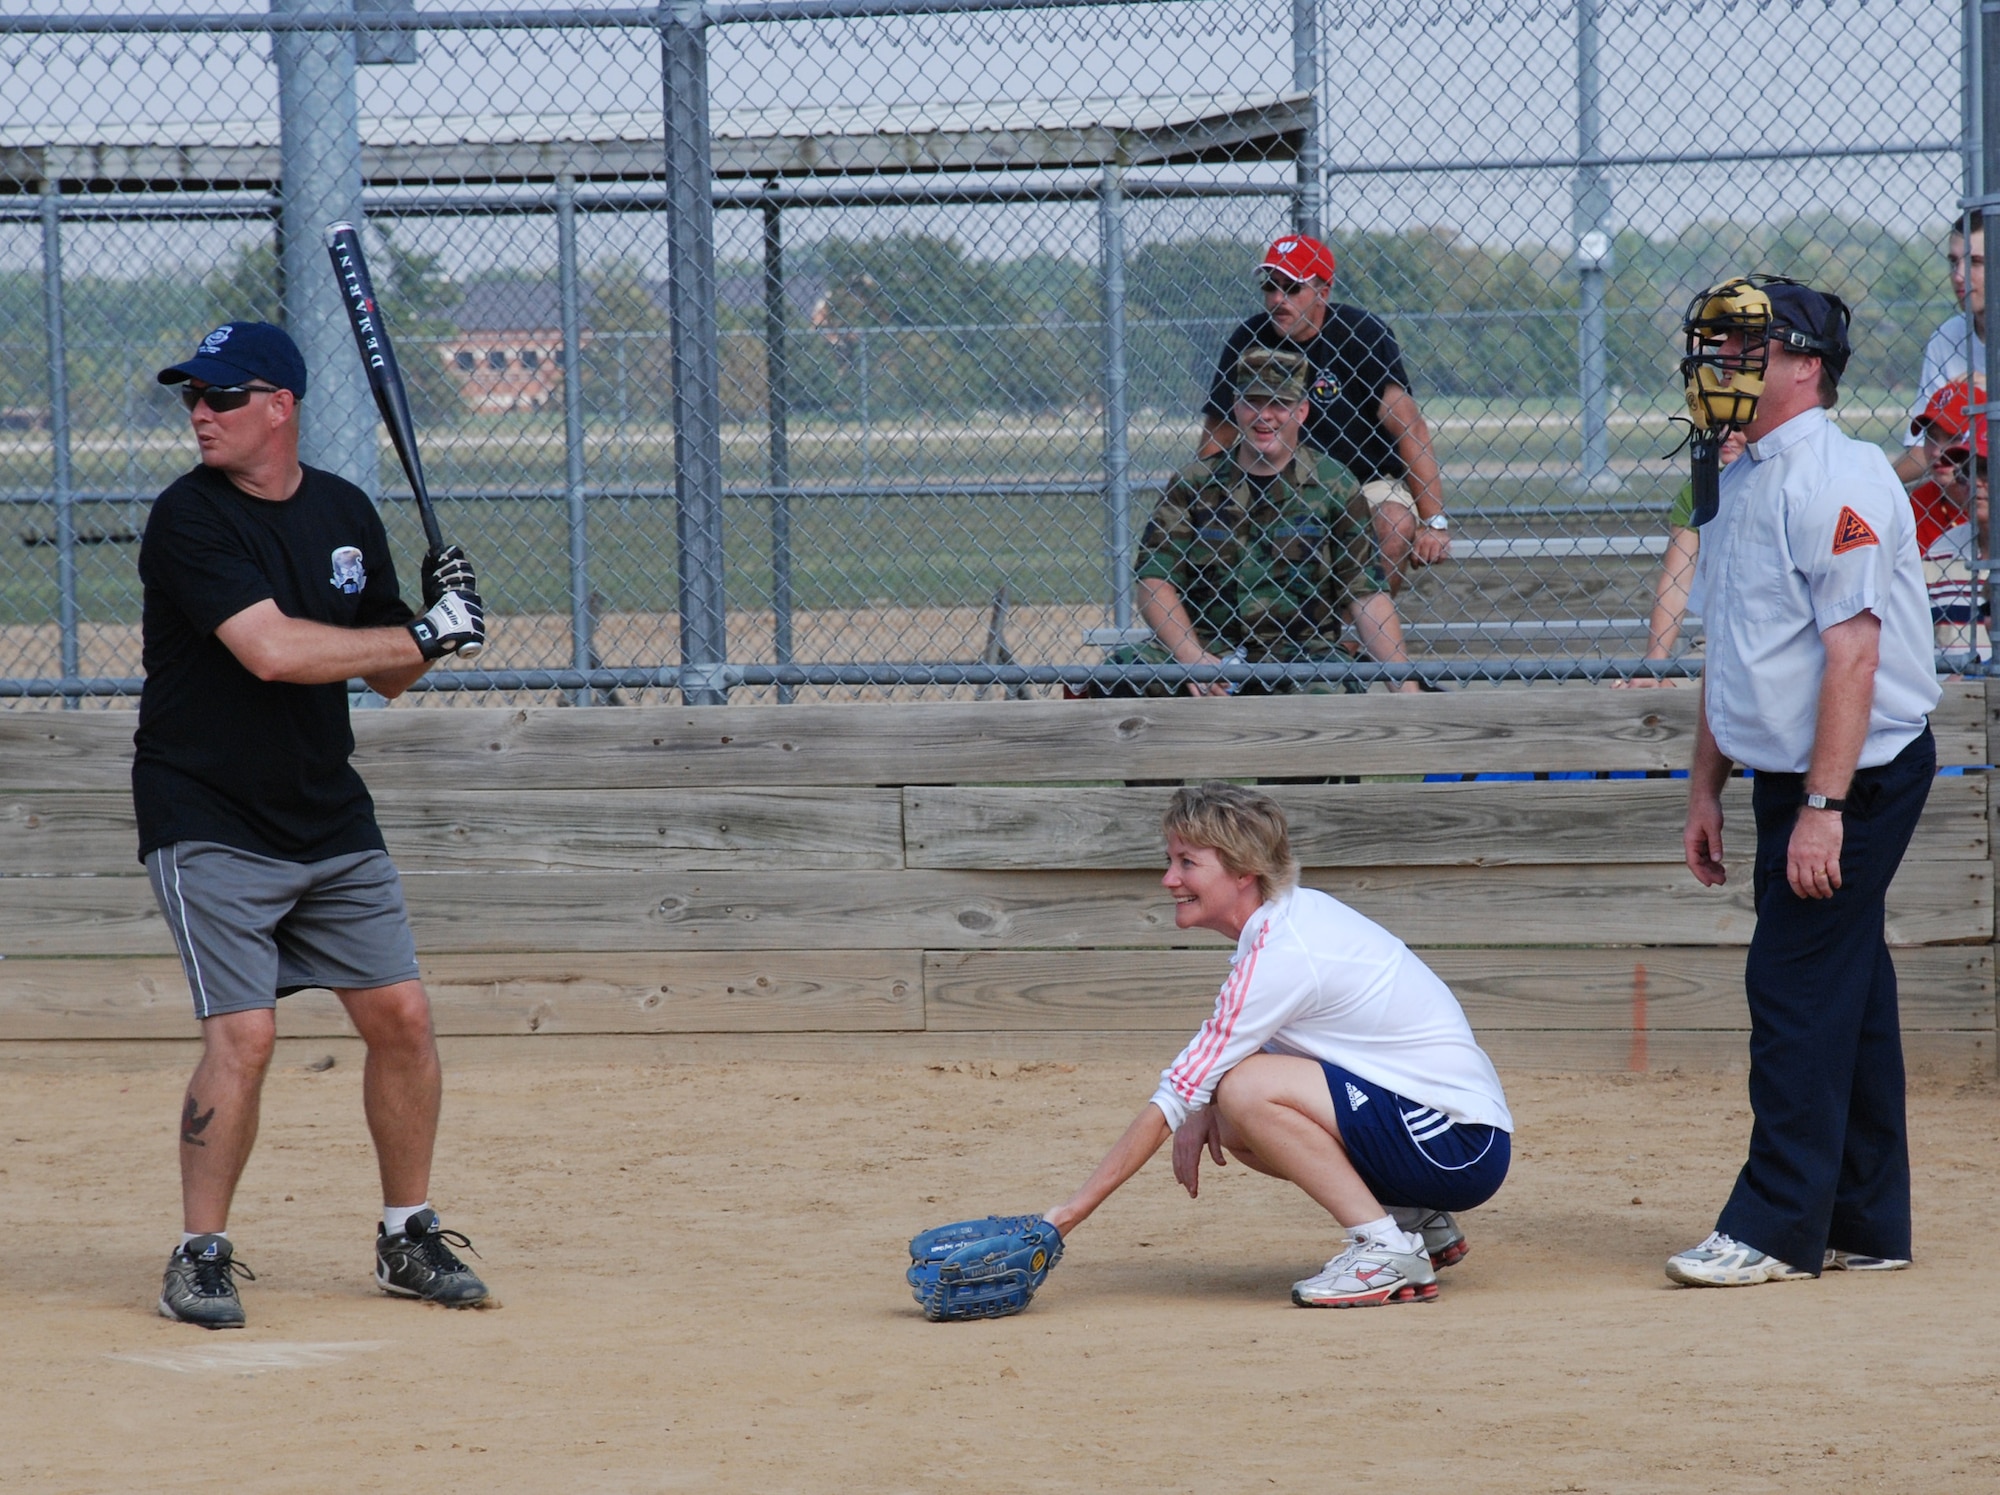 Hey there batter!  Enlisted and officers battled to a 10-10 tie at the recent softball match.